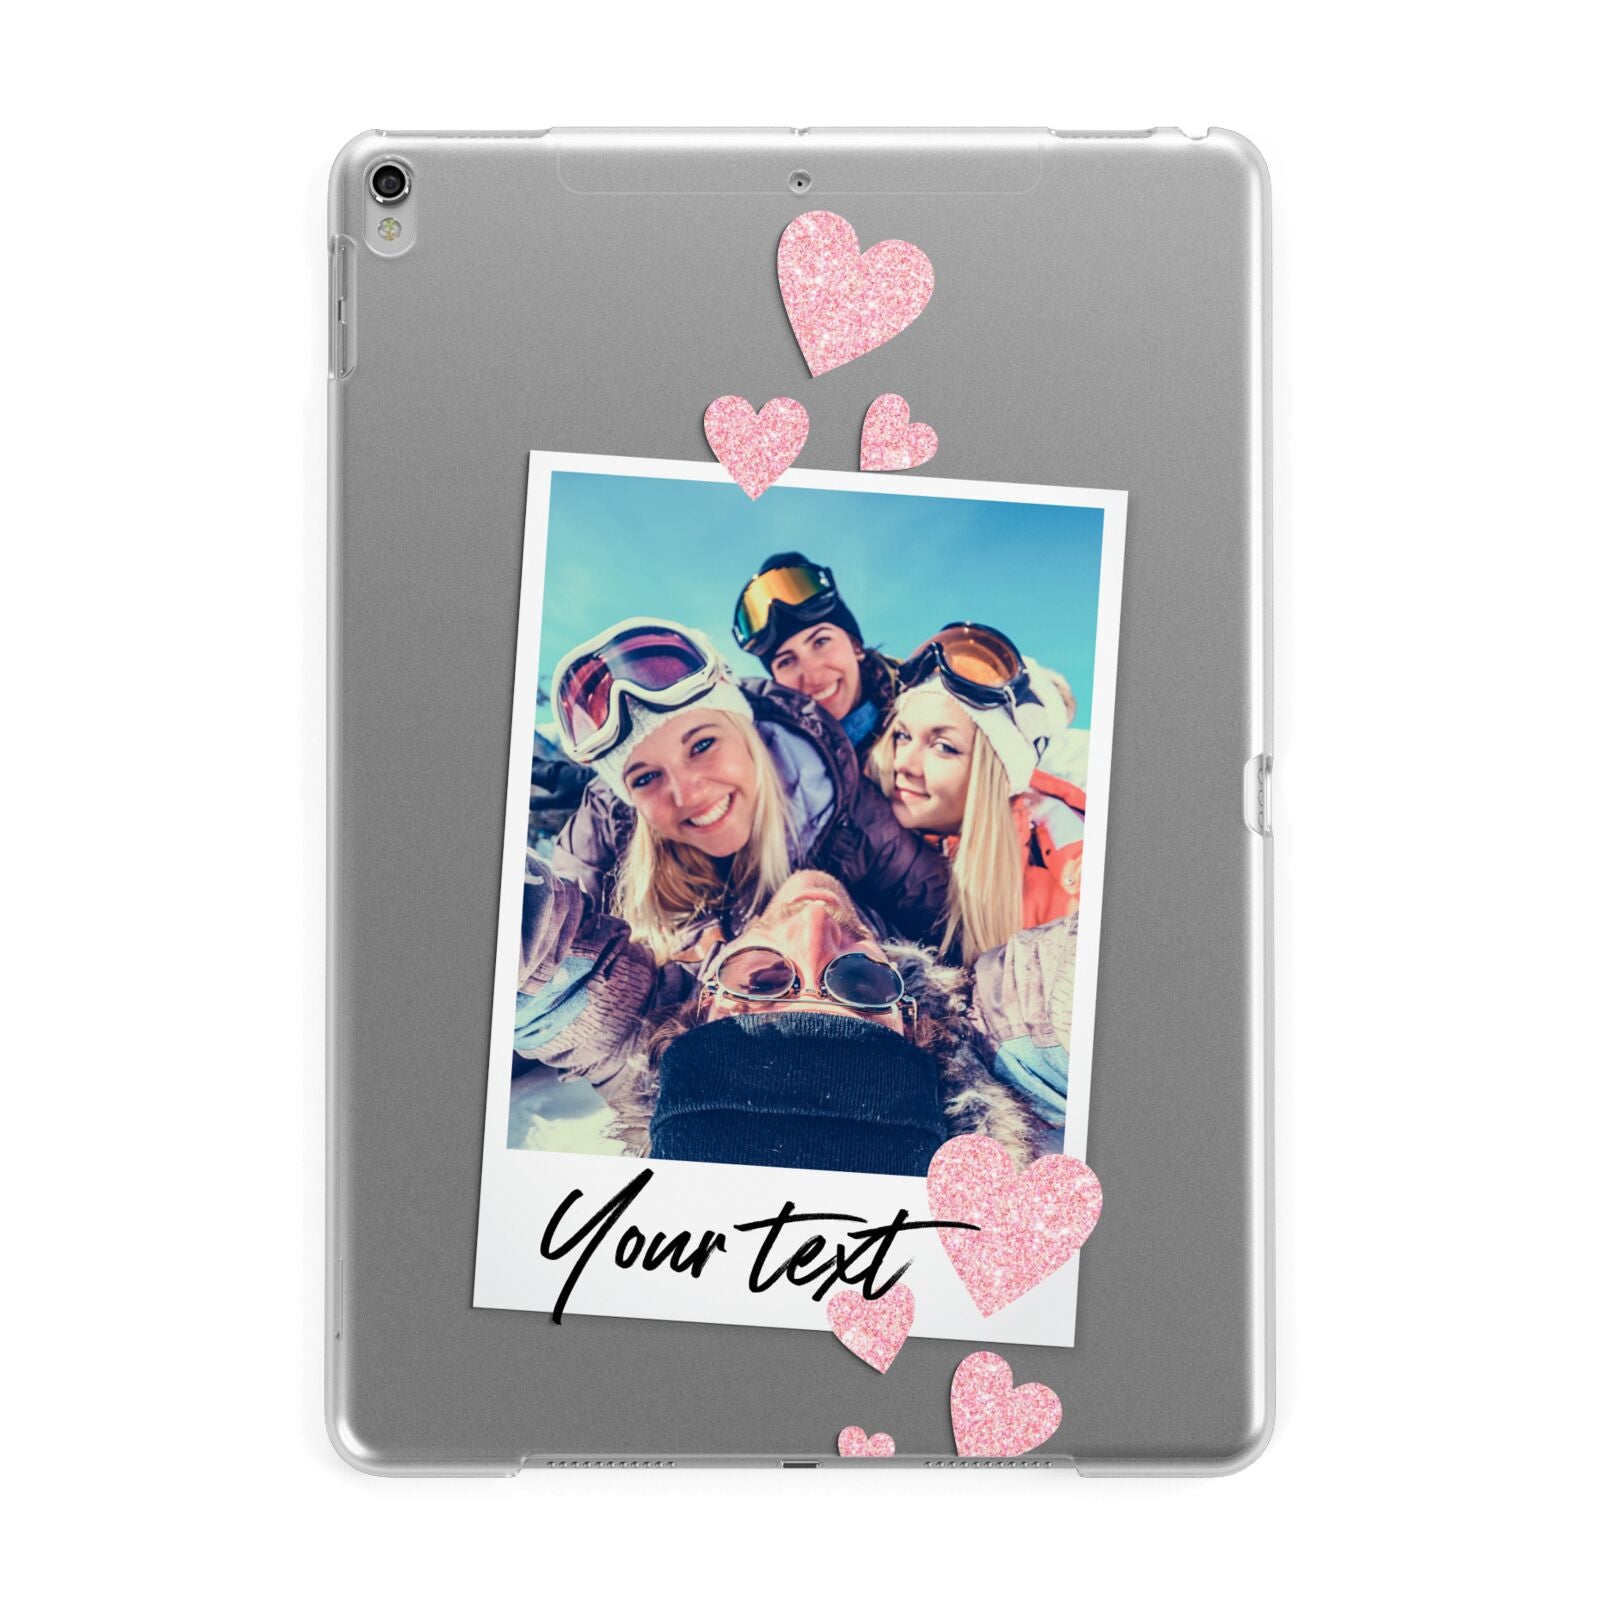 Photo with Text Apple iPad Silver Case